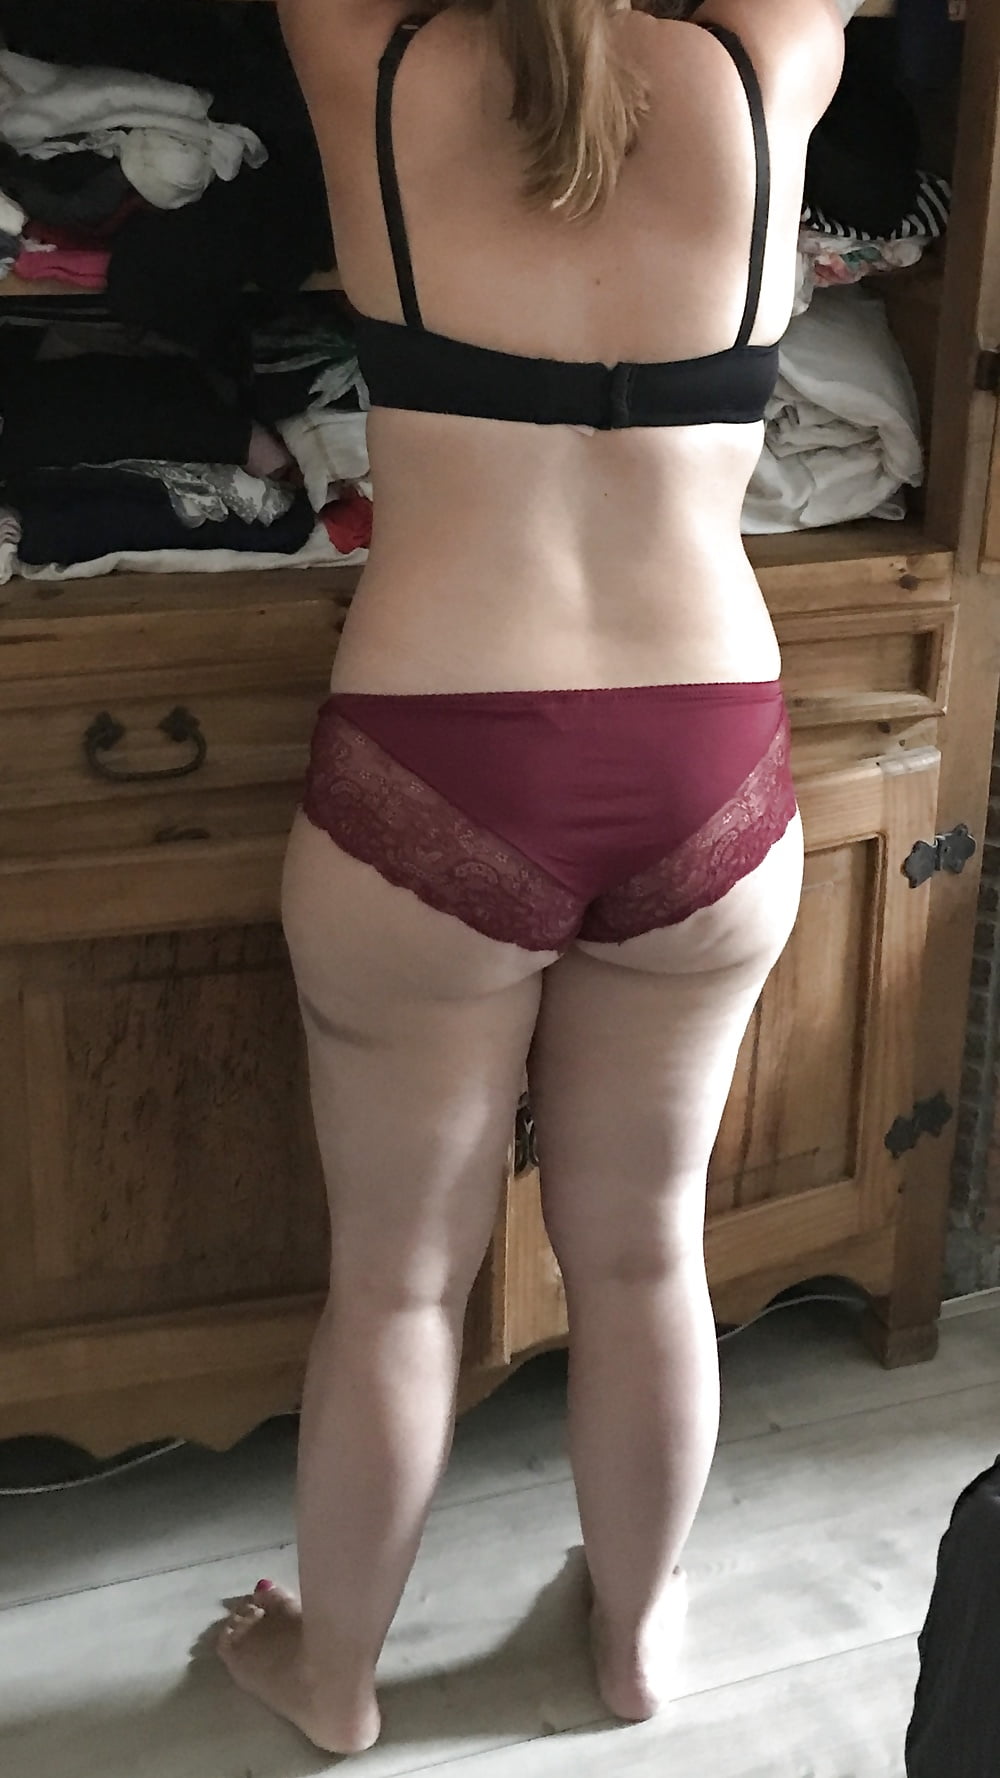 My wife naked & getting dressed (secret photos 2) (11/11)